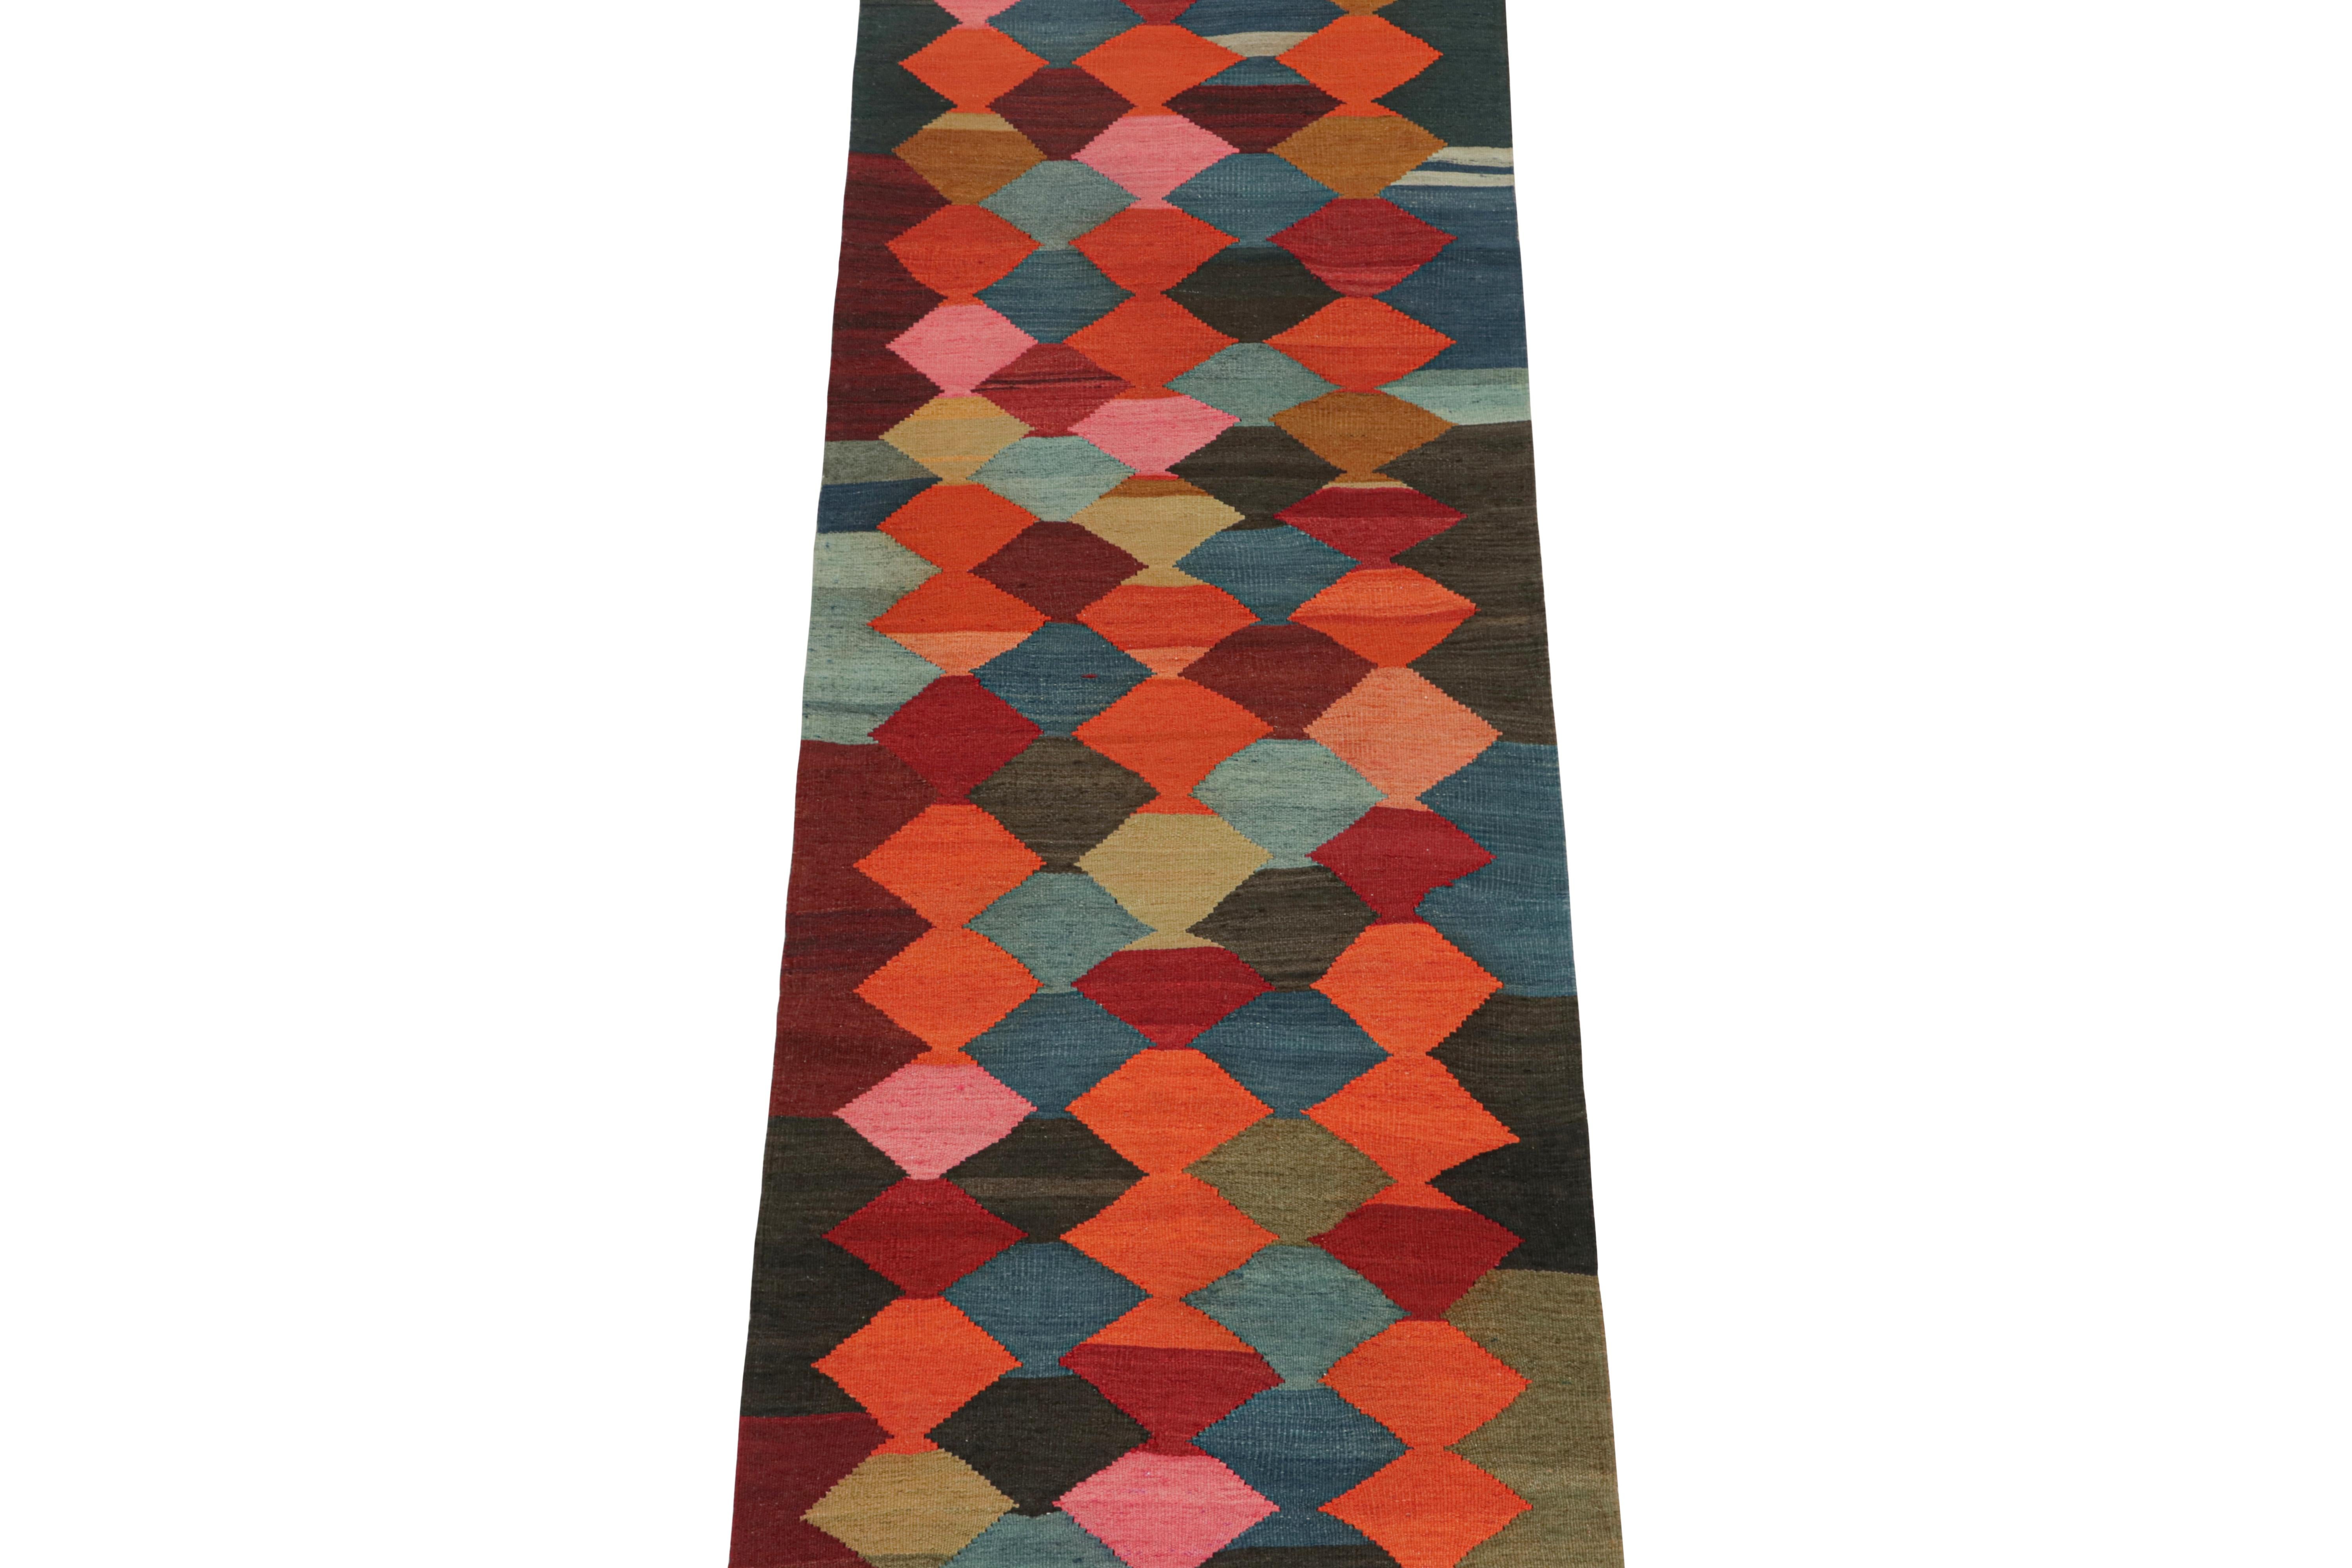 This vintage 3x8 Persian Kilim is a tribal runner we believe hails from the Karadagh region. Handwoven in wool, it originates circa 1950-1960.

Further on the Design:

This runner prefers geometric patterns like lozenges and diamonds in vibrant